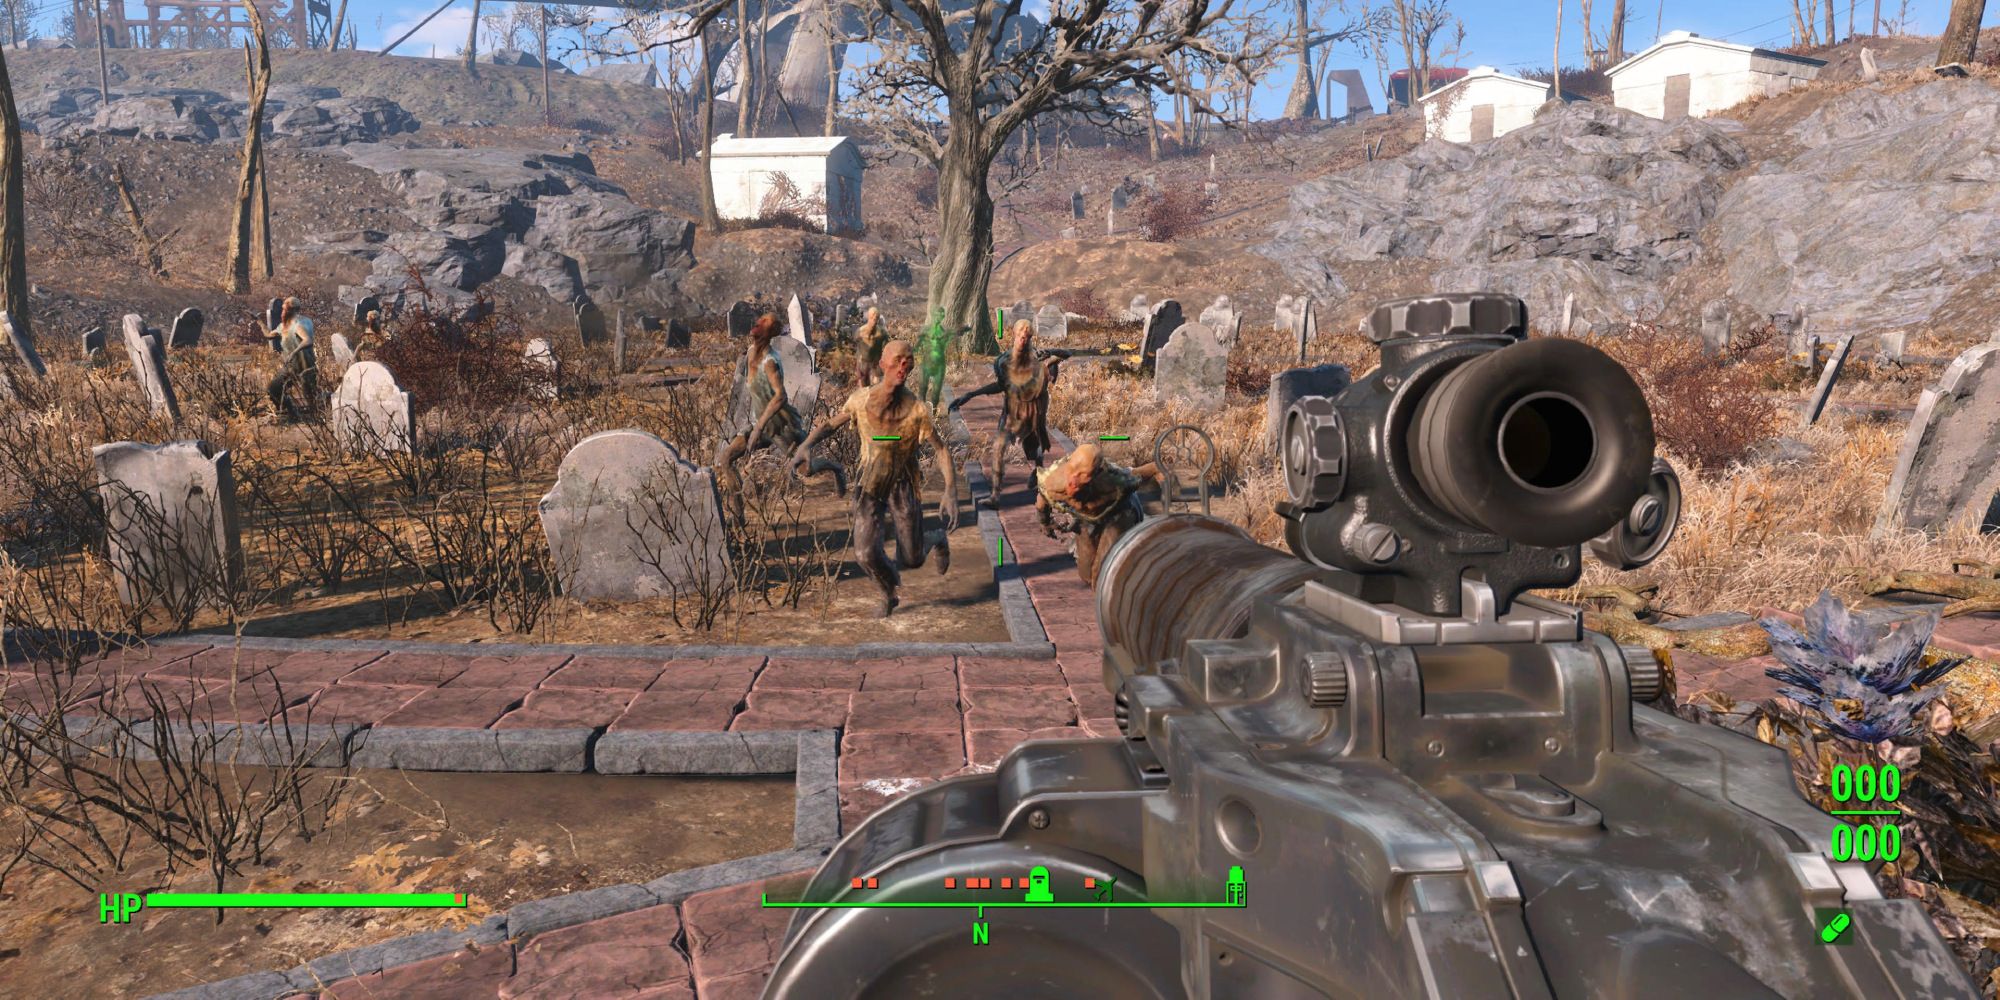 Fallout 4 Moves the Fallout Series Forward, but Leaves Key Things Behind